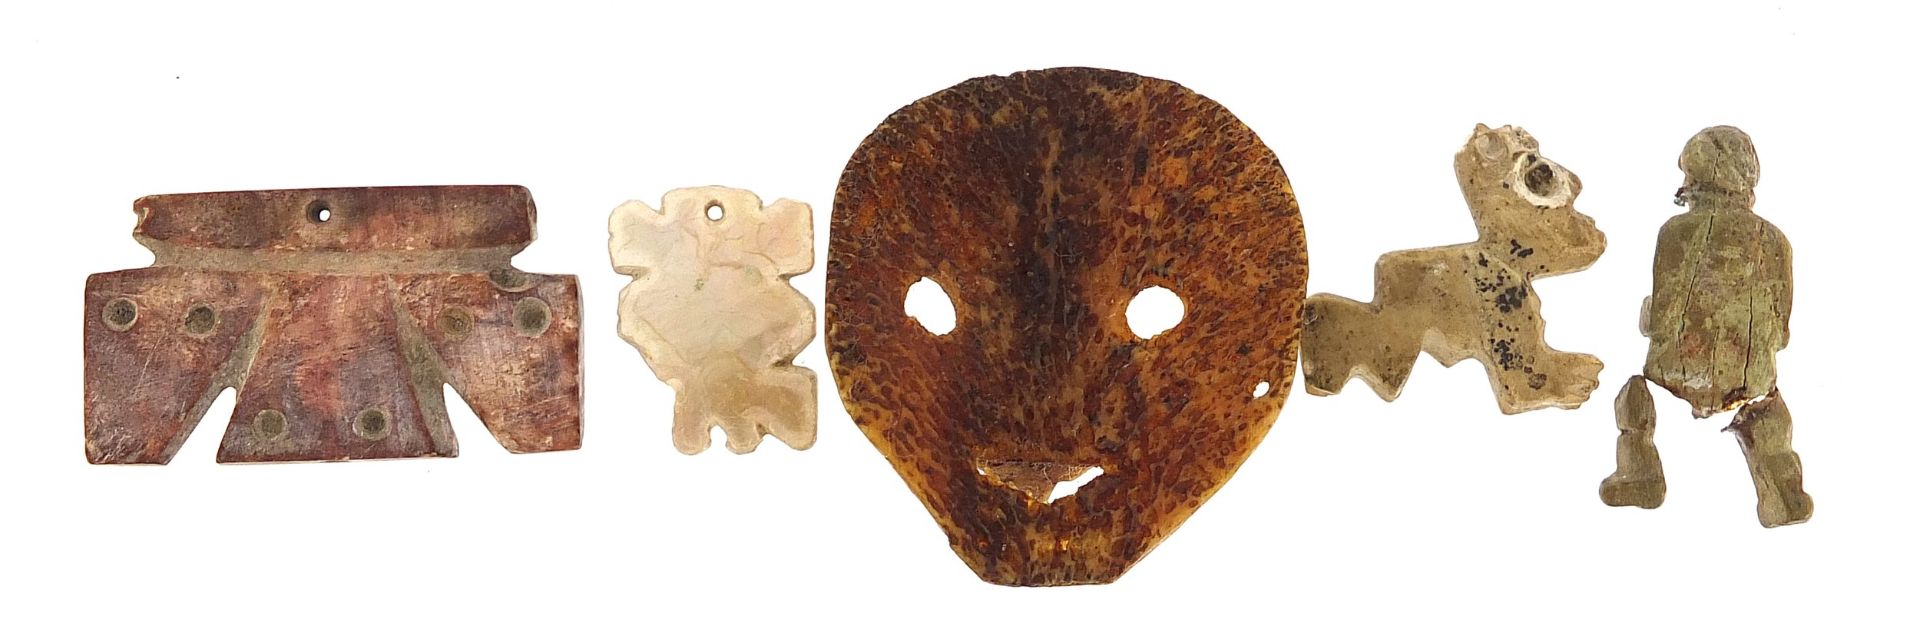 Antiquities including a carved bone face mask, the largest 4cm high - Image 6 of 8